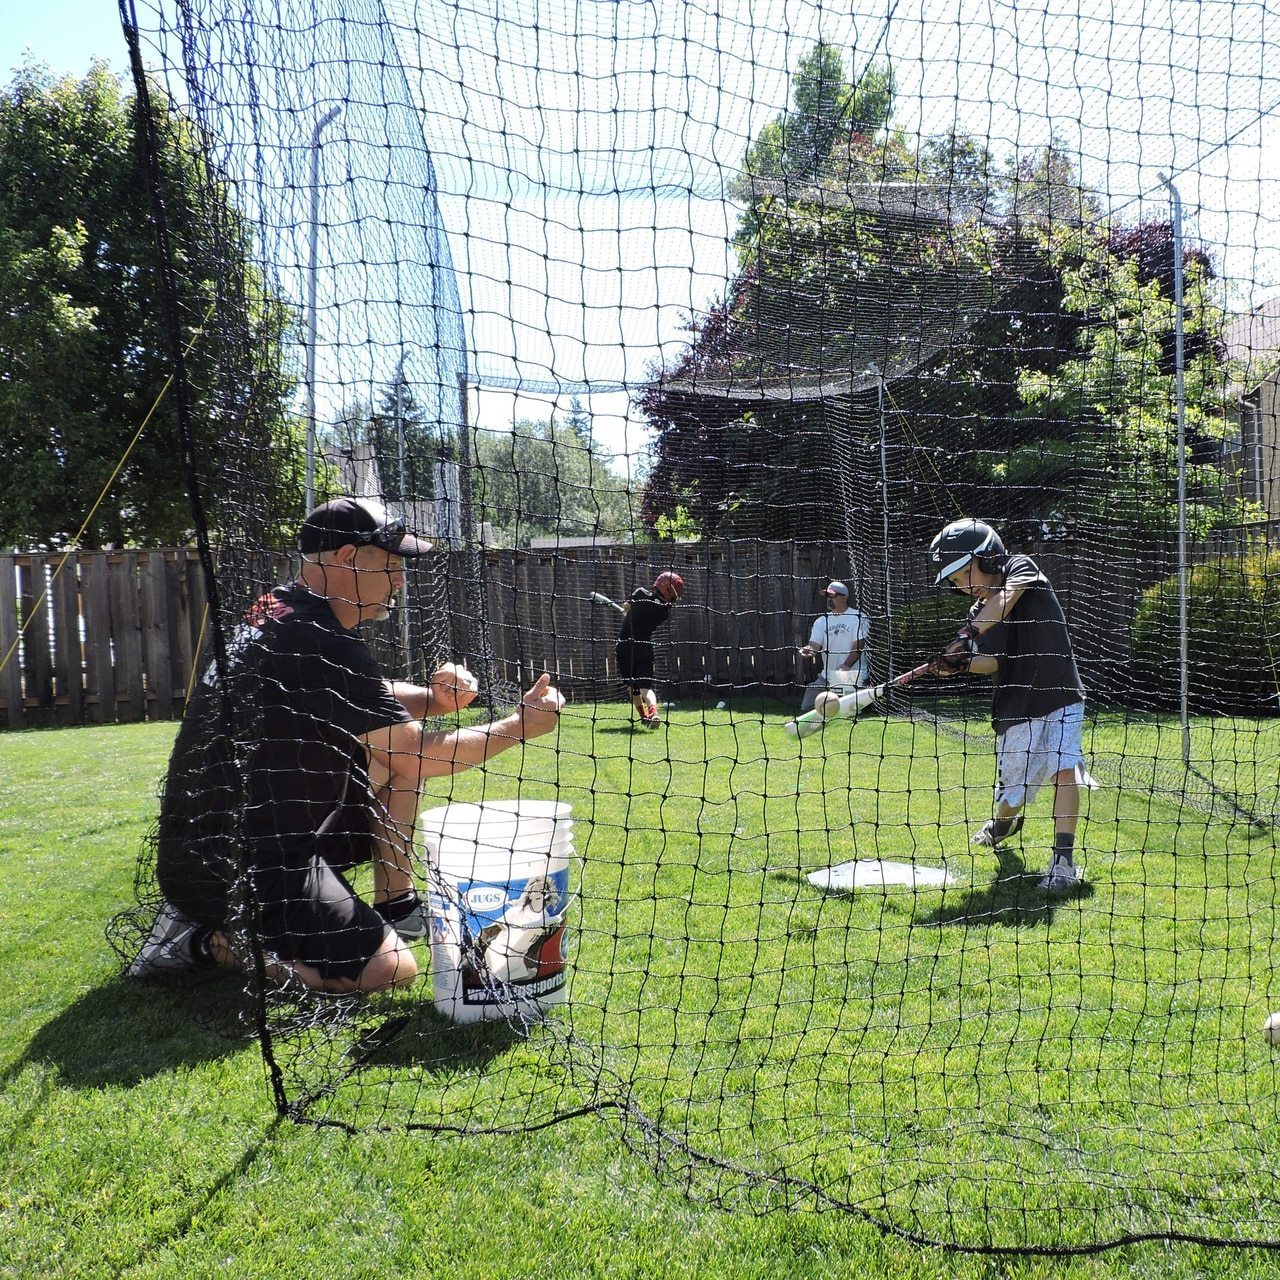 Jugs Hit at Home Complete Backyard Batting Cage Practice with Kid Batter